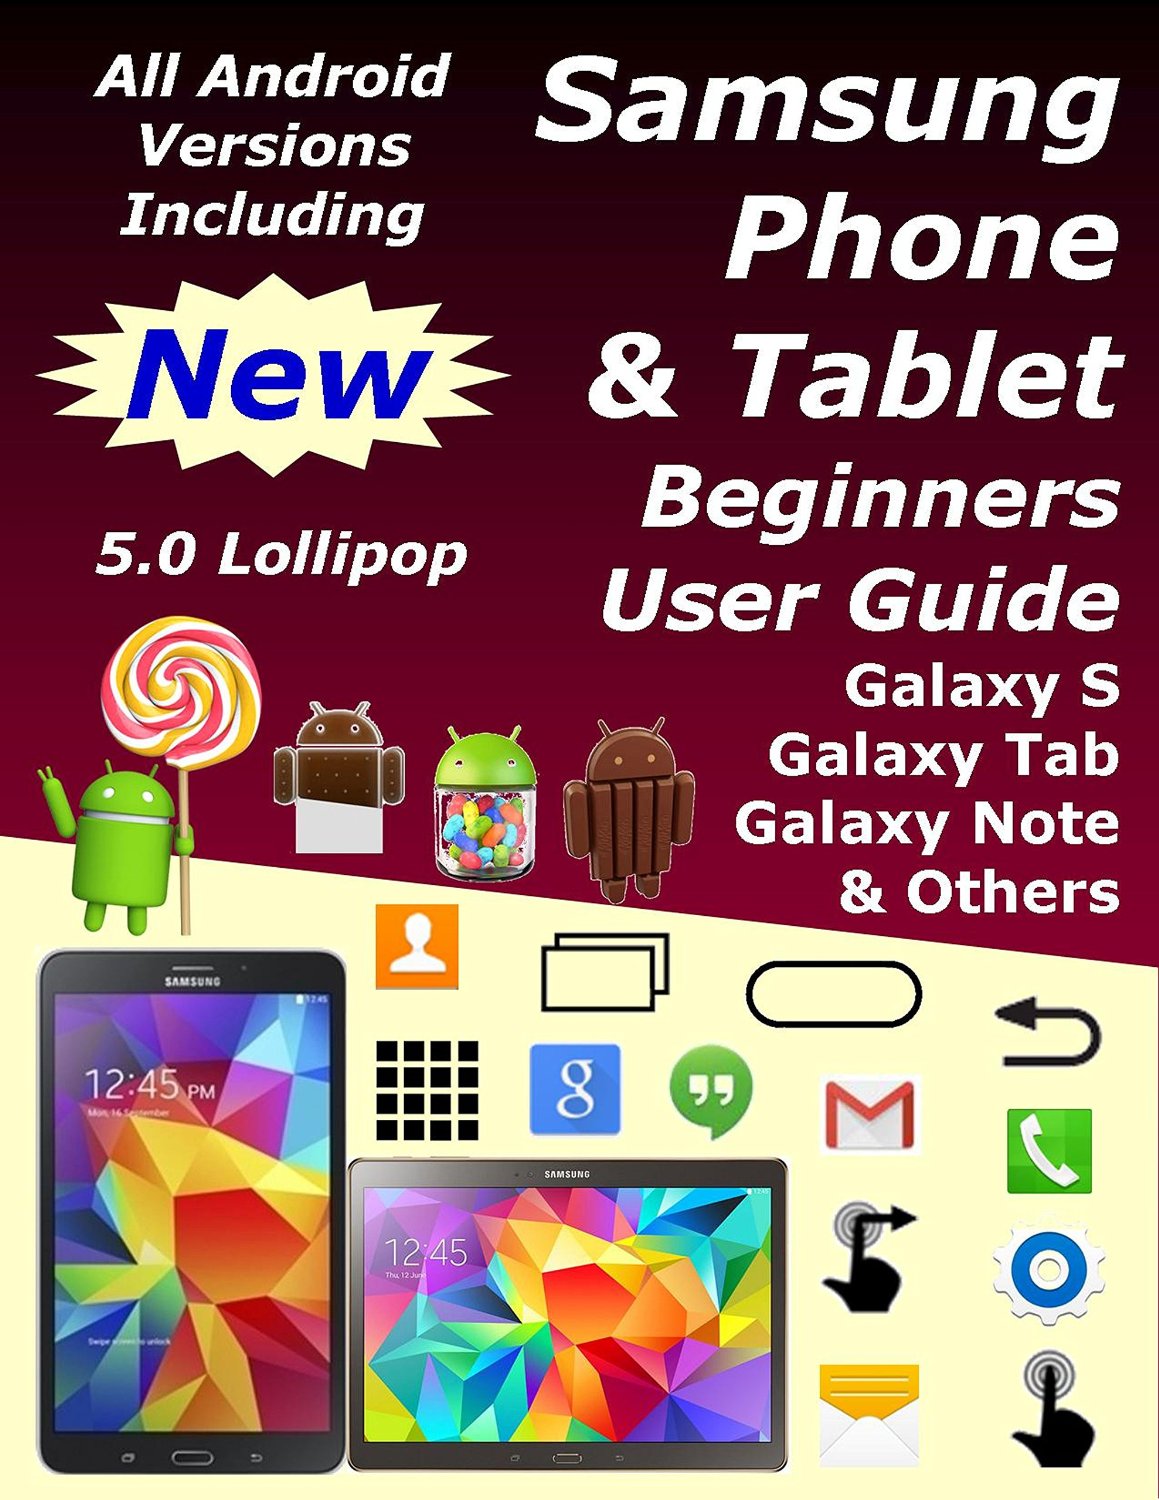 Samsung Phone & Tablet Beginners User Guide: Galaxy S, Galaxy Tab, Galaxy Note, & Others